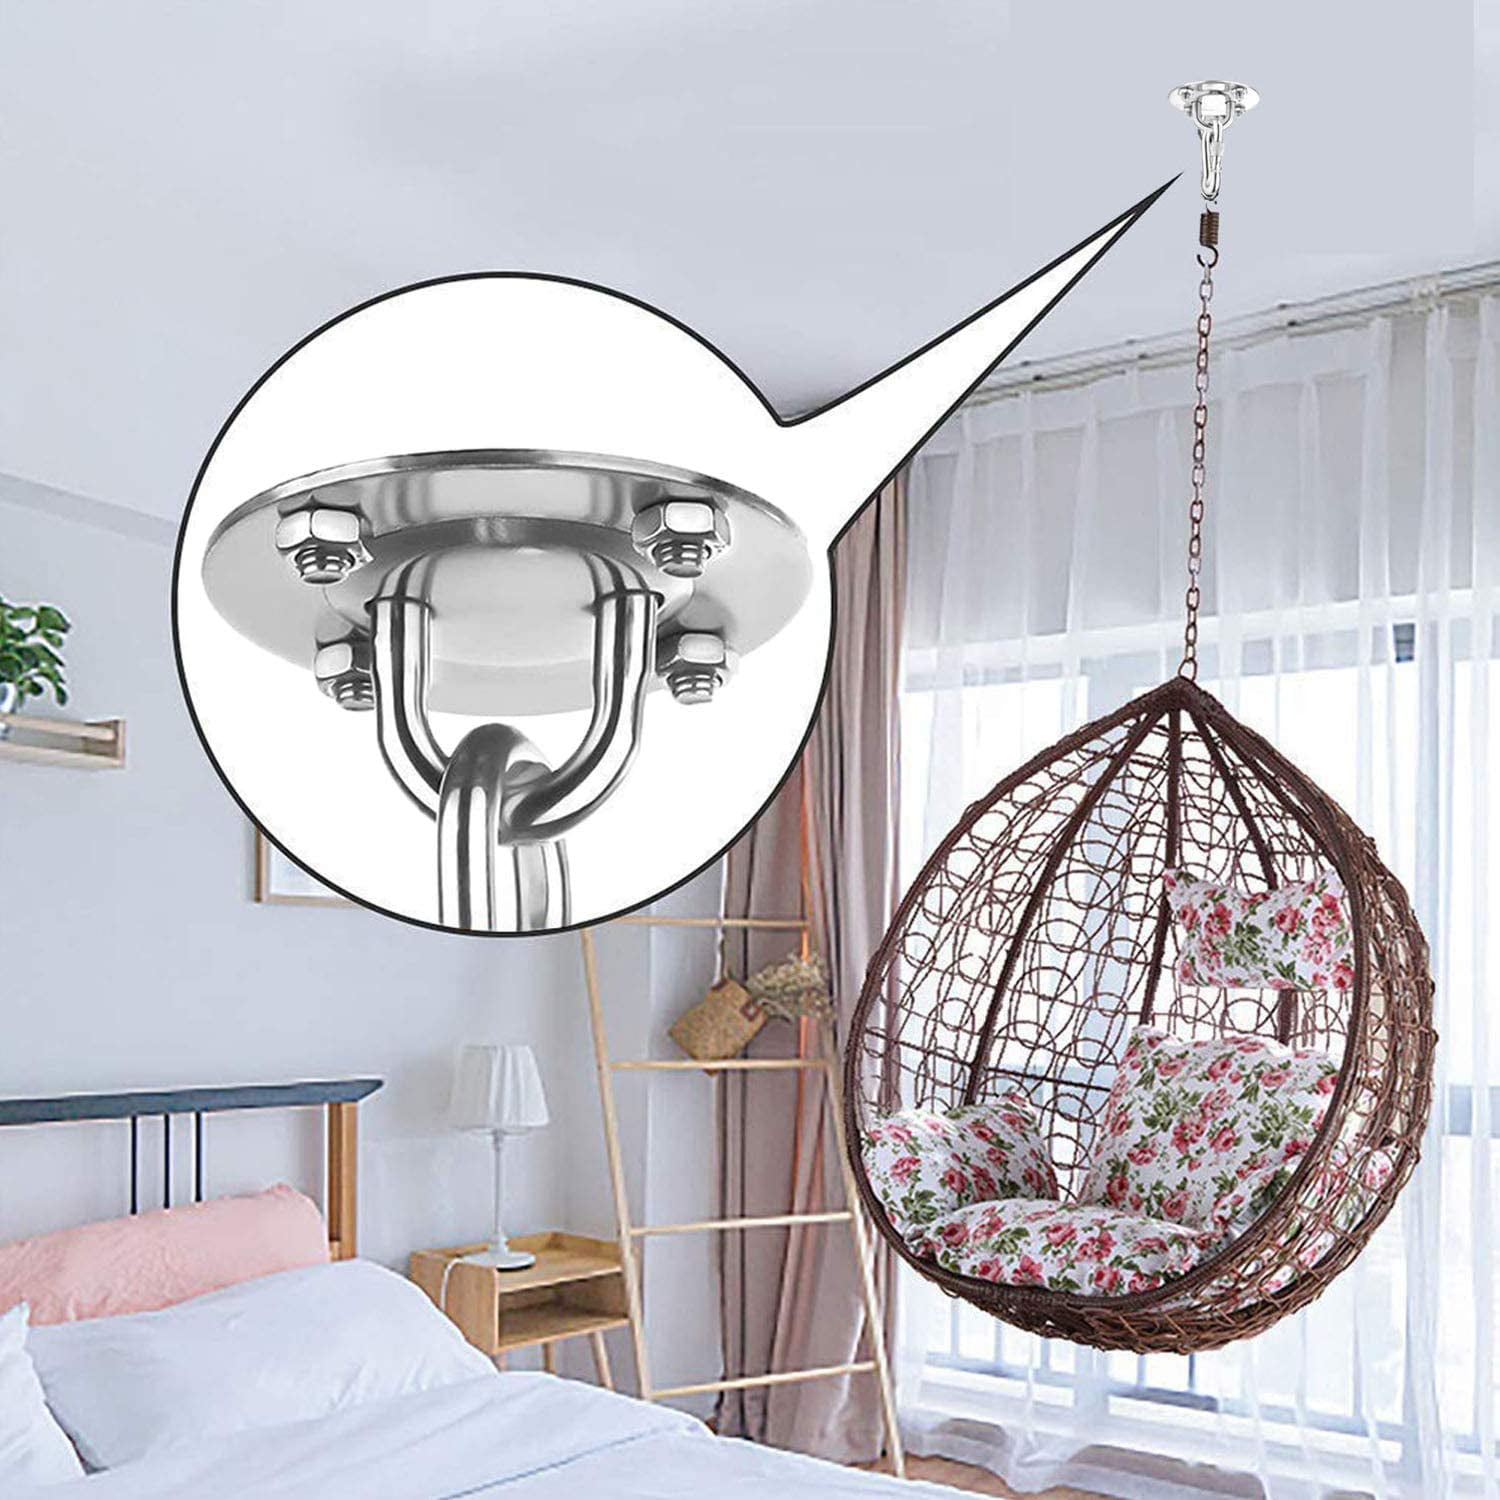 Stainless Steel Ceiling Hook Hanging Chair 180 ° to 450KG Rocking Hook Ceiling Mount